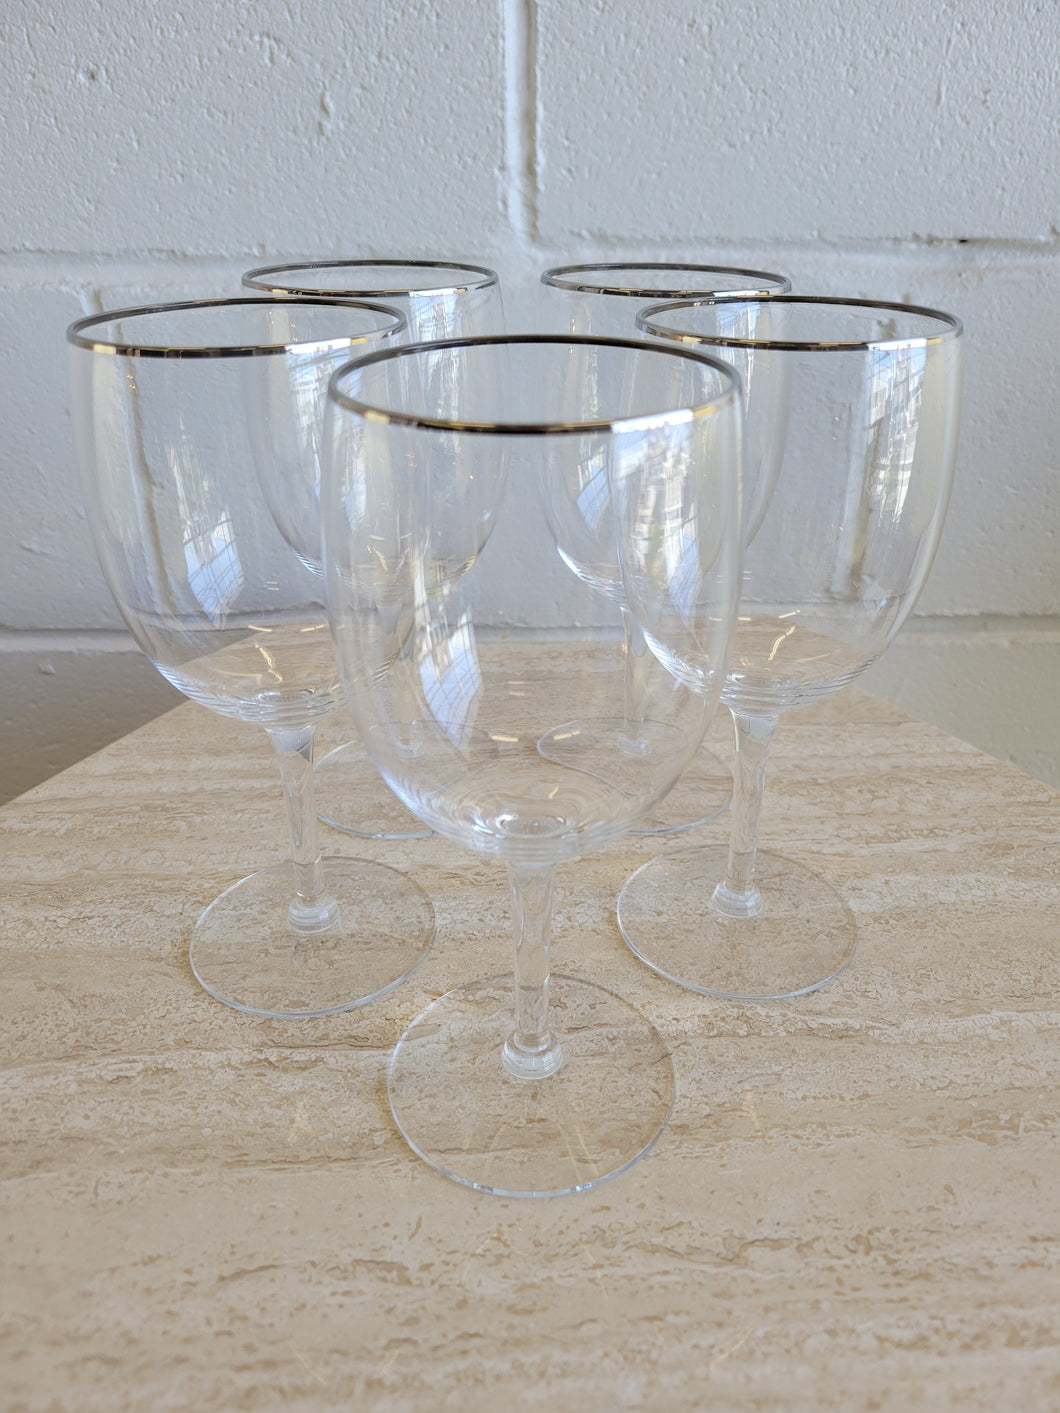 5 Count Silver Rimmed Crystal Wine Glasses